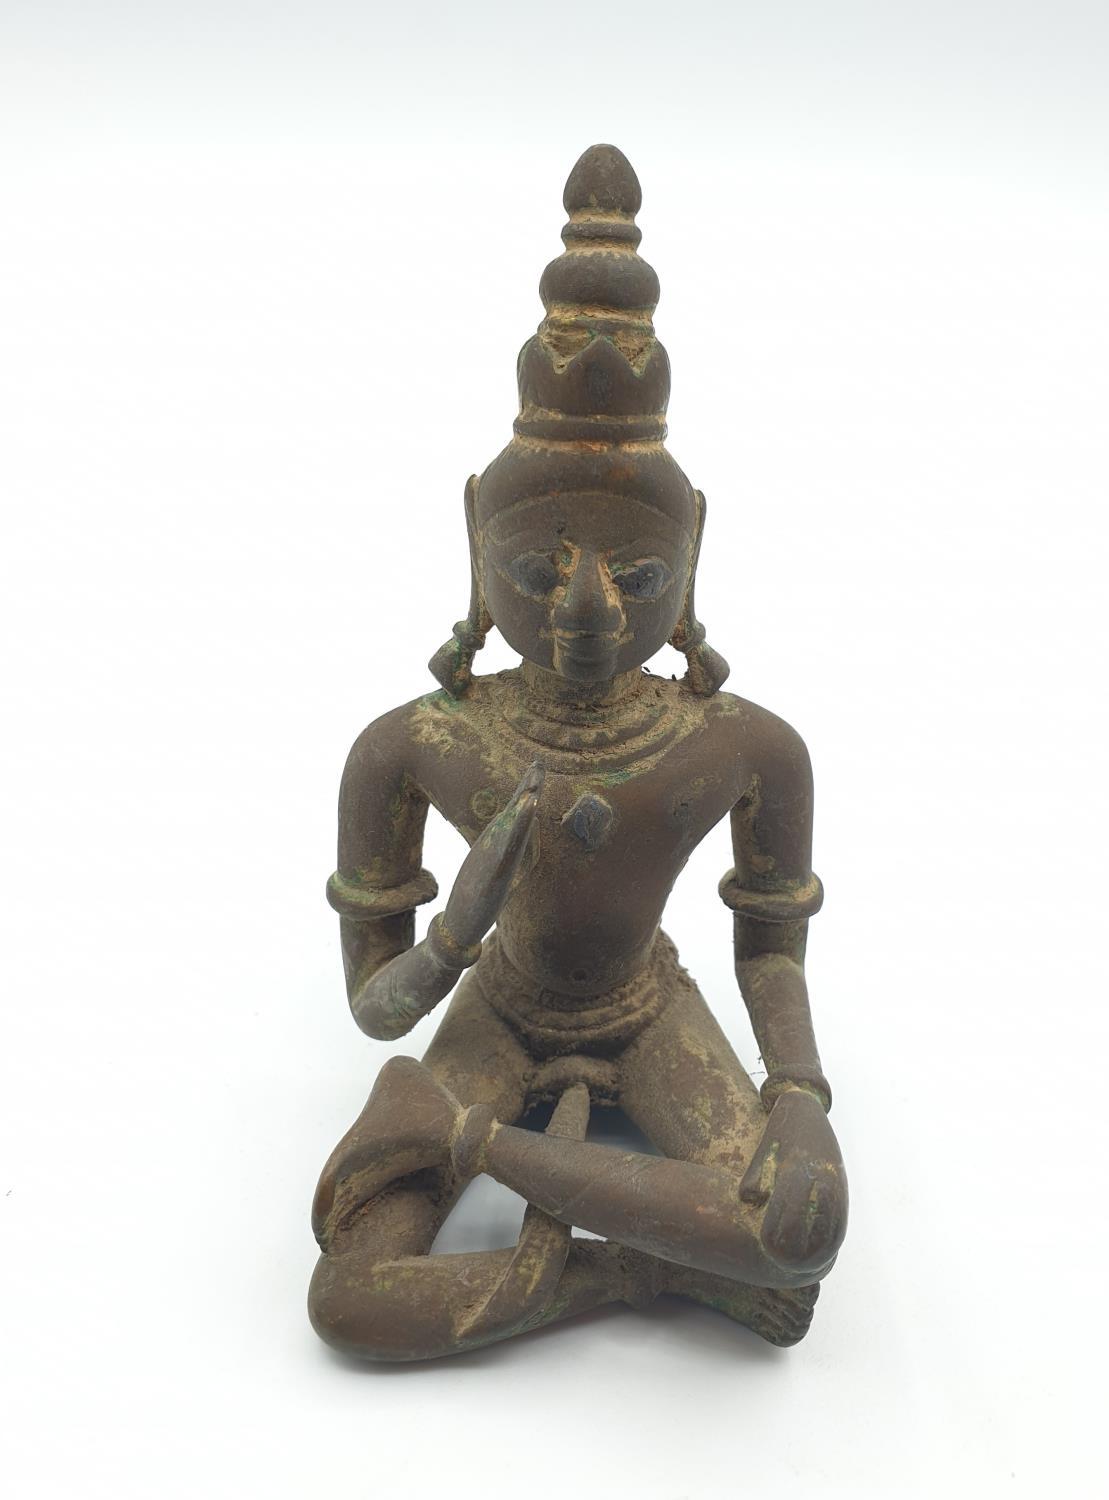 Late 18th century Oriental religious figure in bronze with gilt finish mostly worn off with age, 9cm